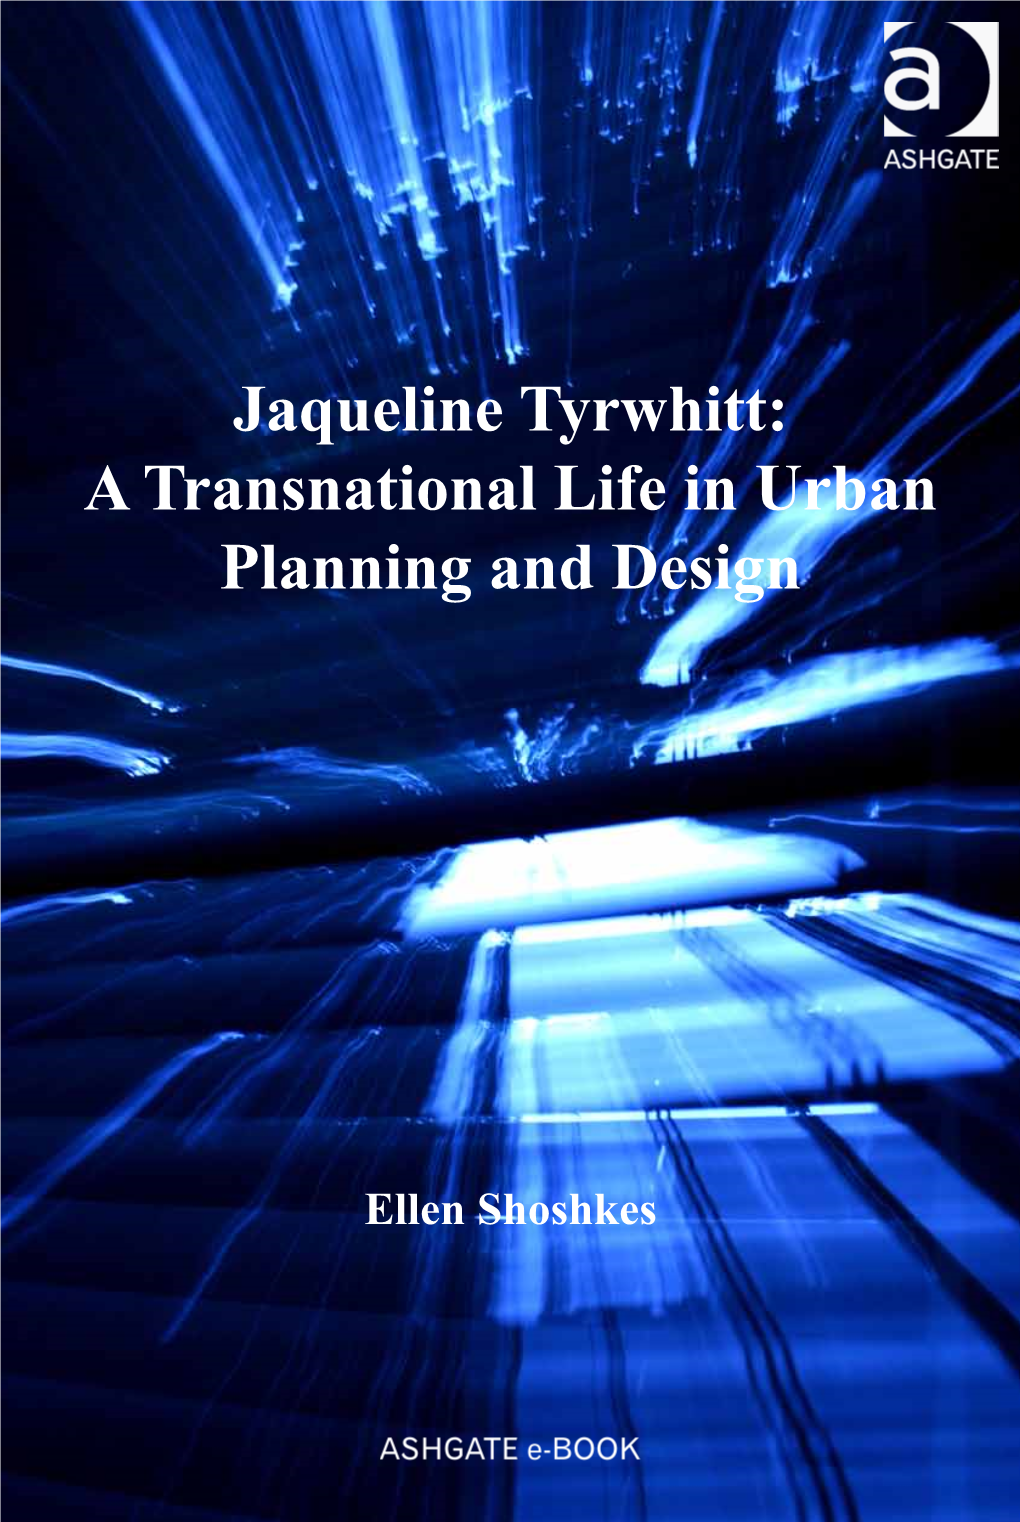 Jaqueline Tyrwhitt: a Transnational Life in Urban Planning and Design